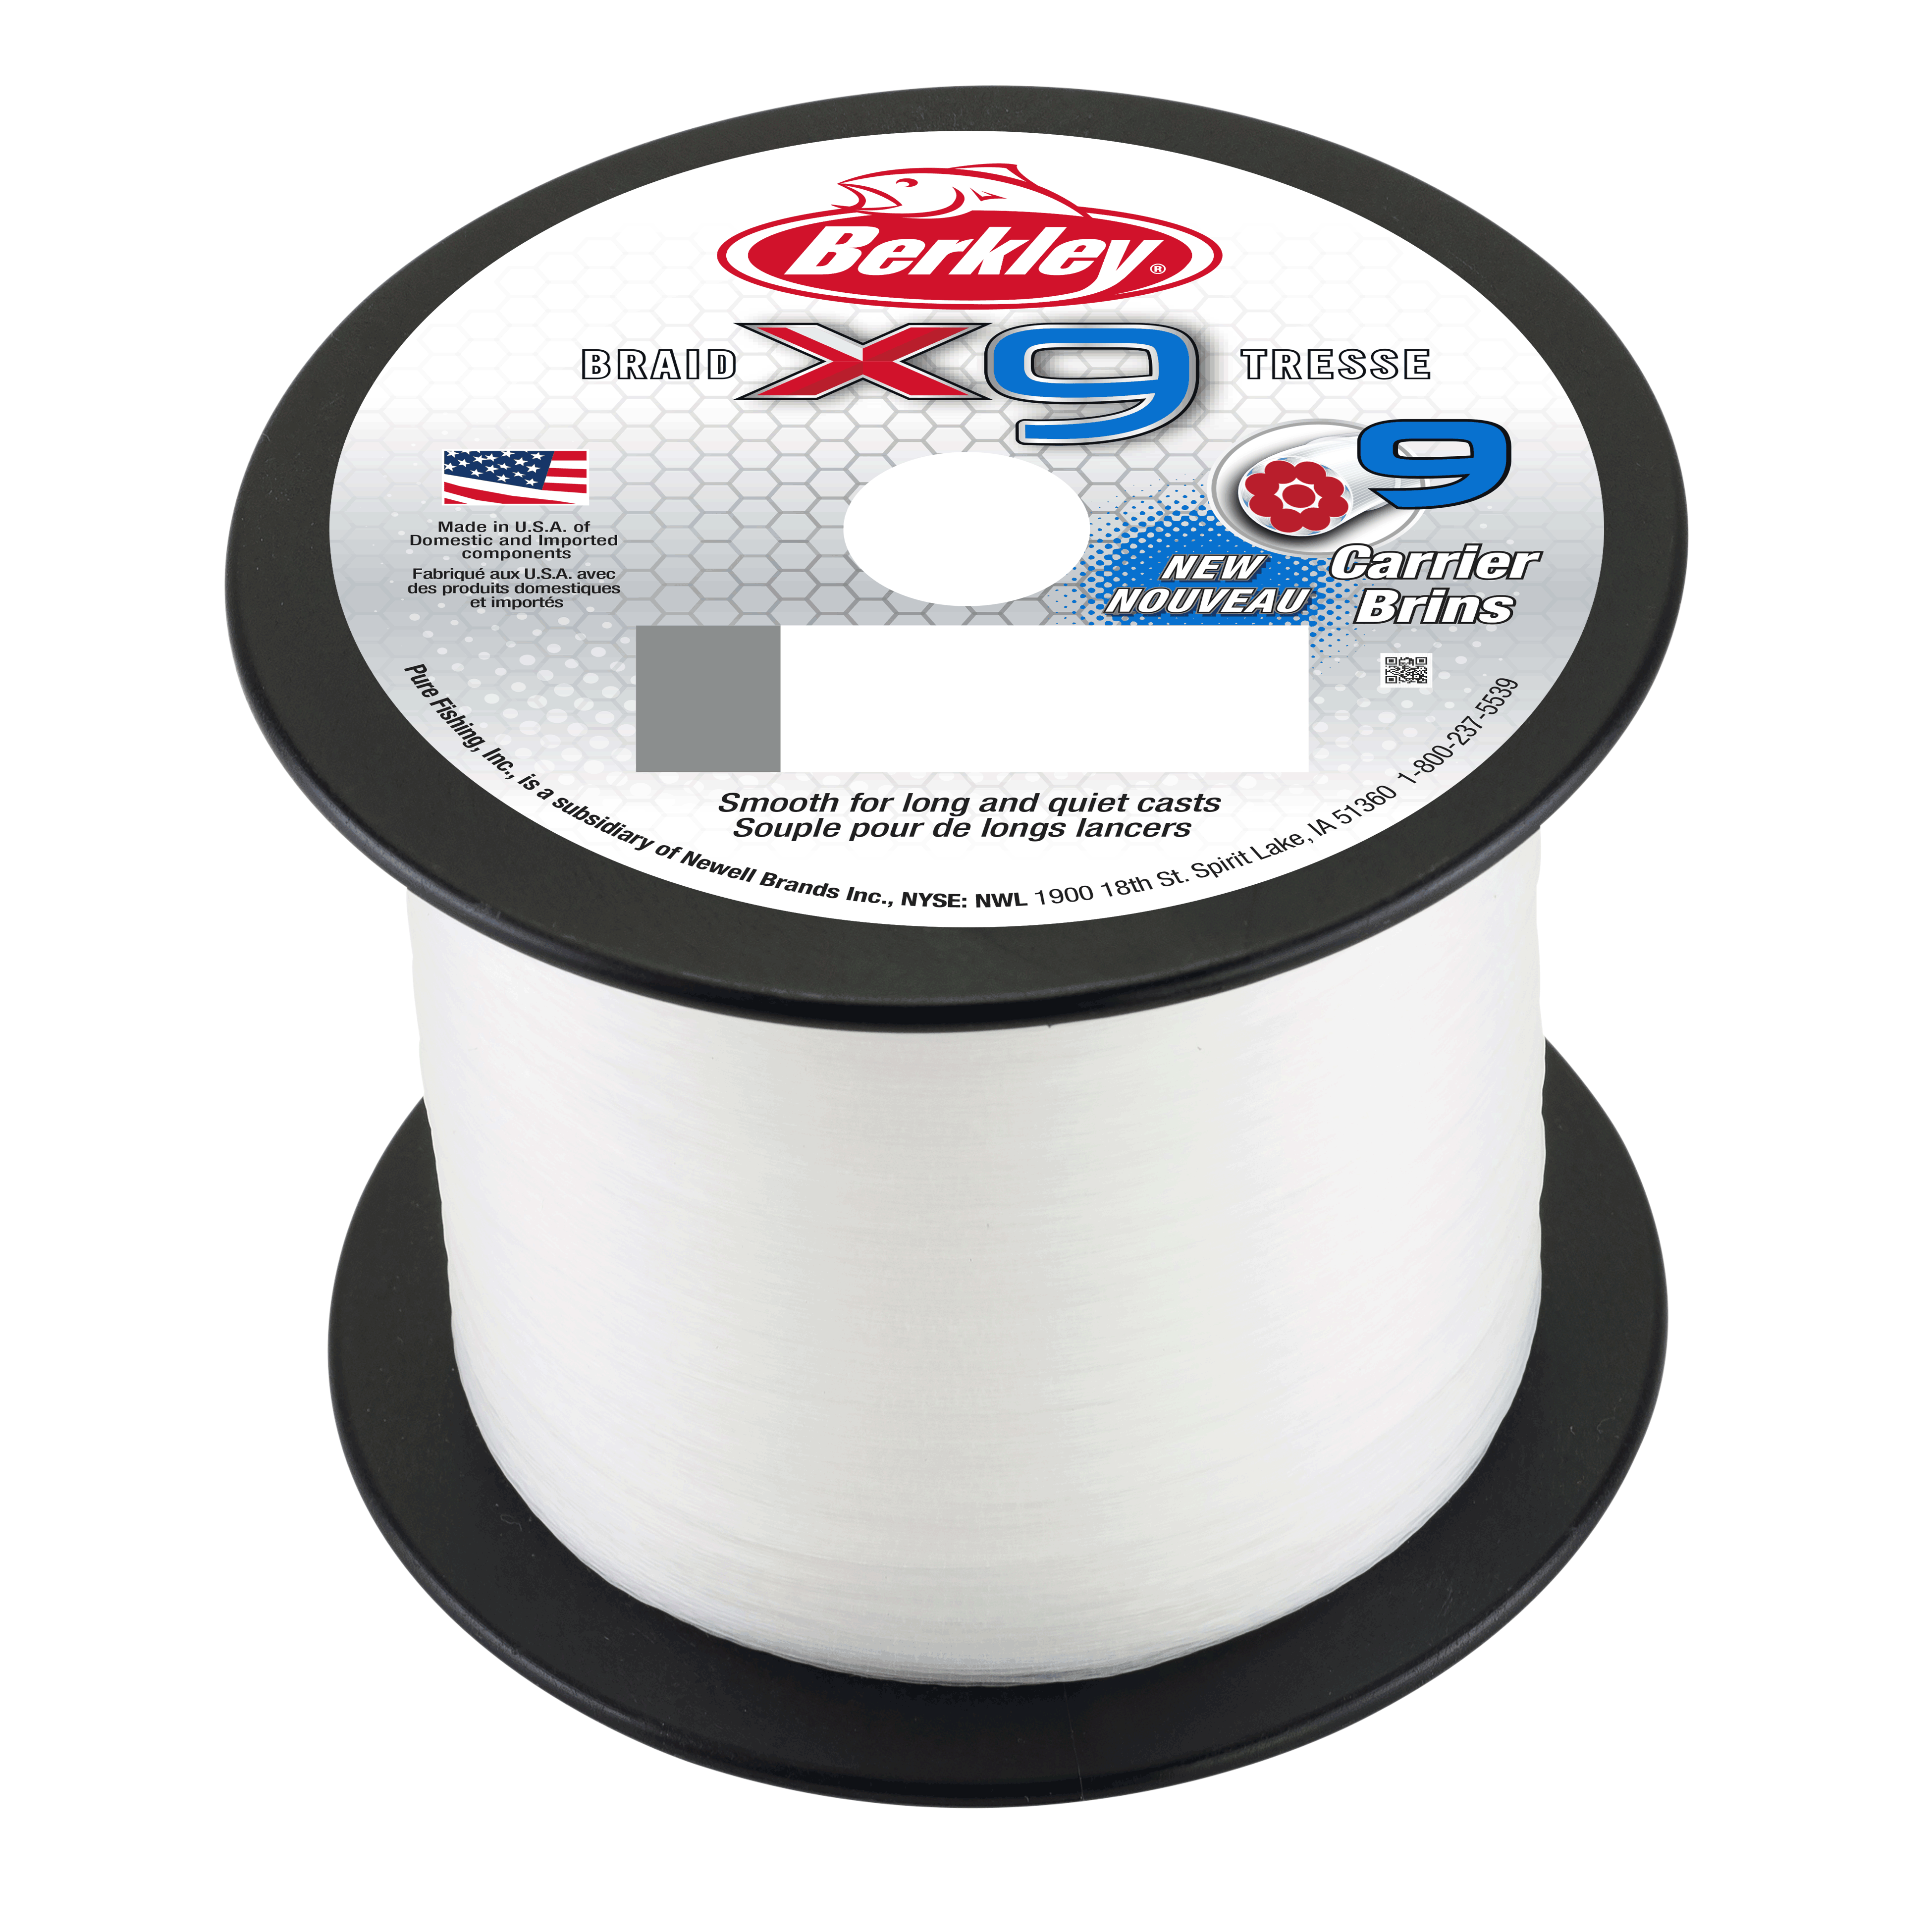 Berkley x9 Braid<BR>
The new Berkley x9 braided line is designed for maximum strength and casting distance so anglers can make long, quiet casts in open water.